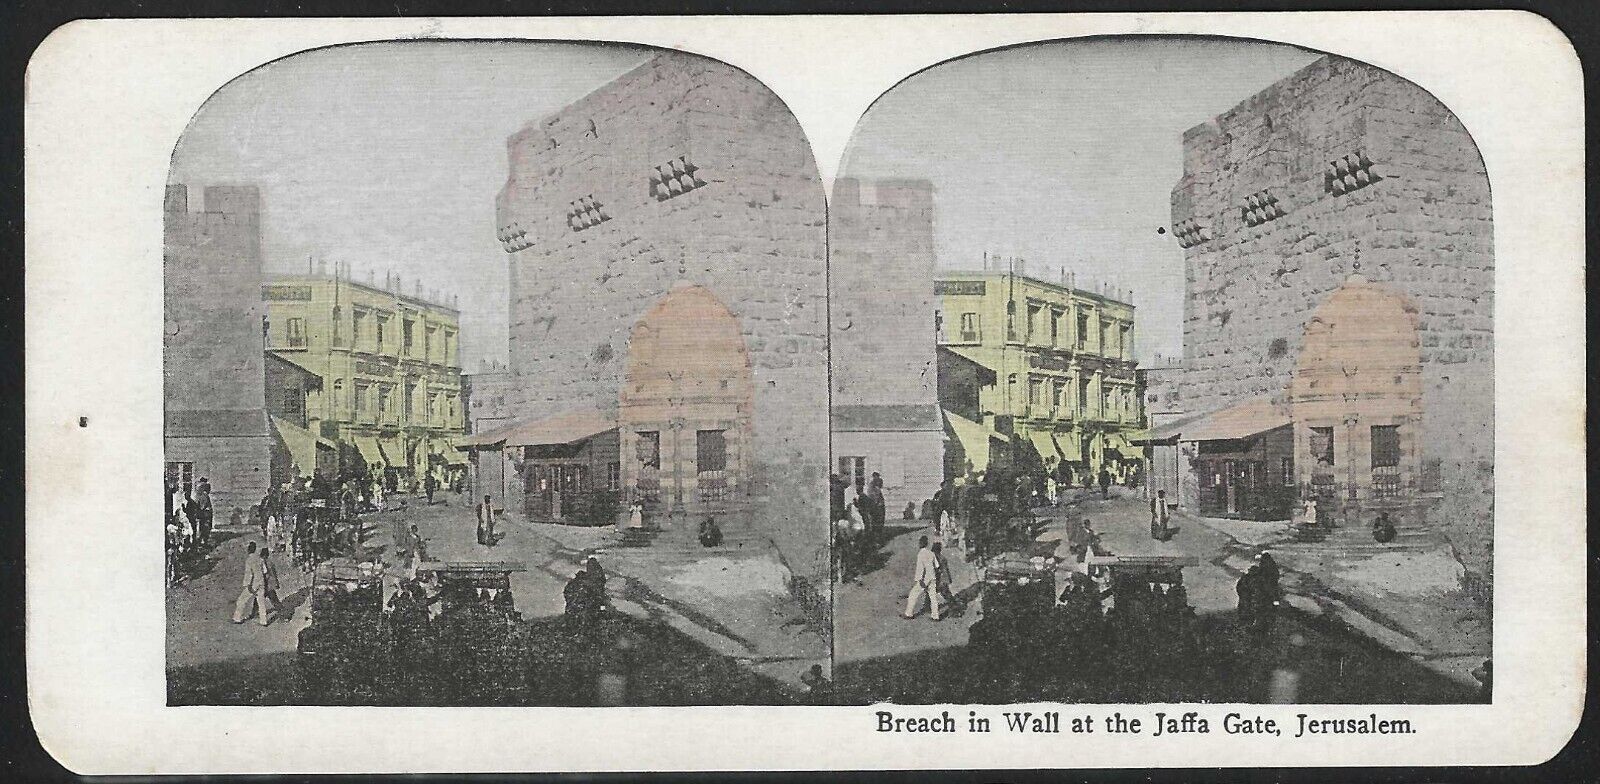 Breach in the Wall at the Jaffa Gate, Hand Colored Stereographic View Card